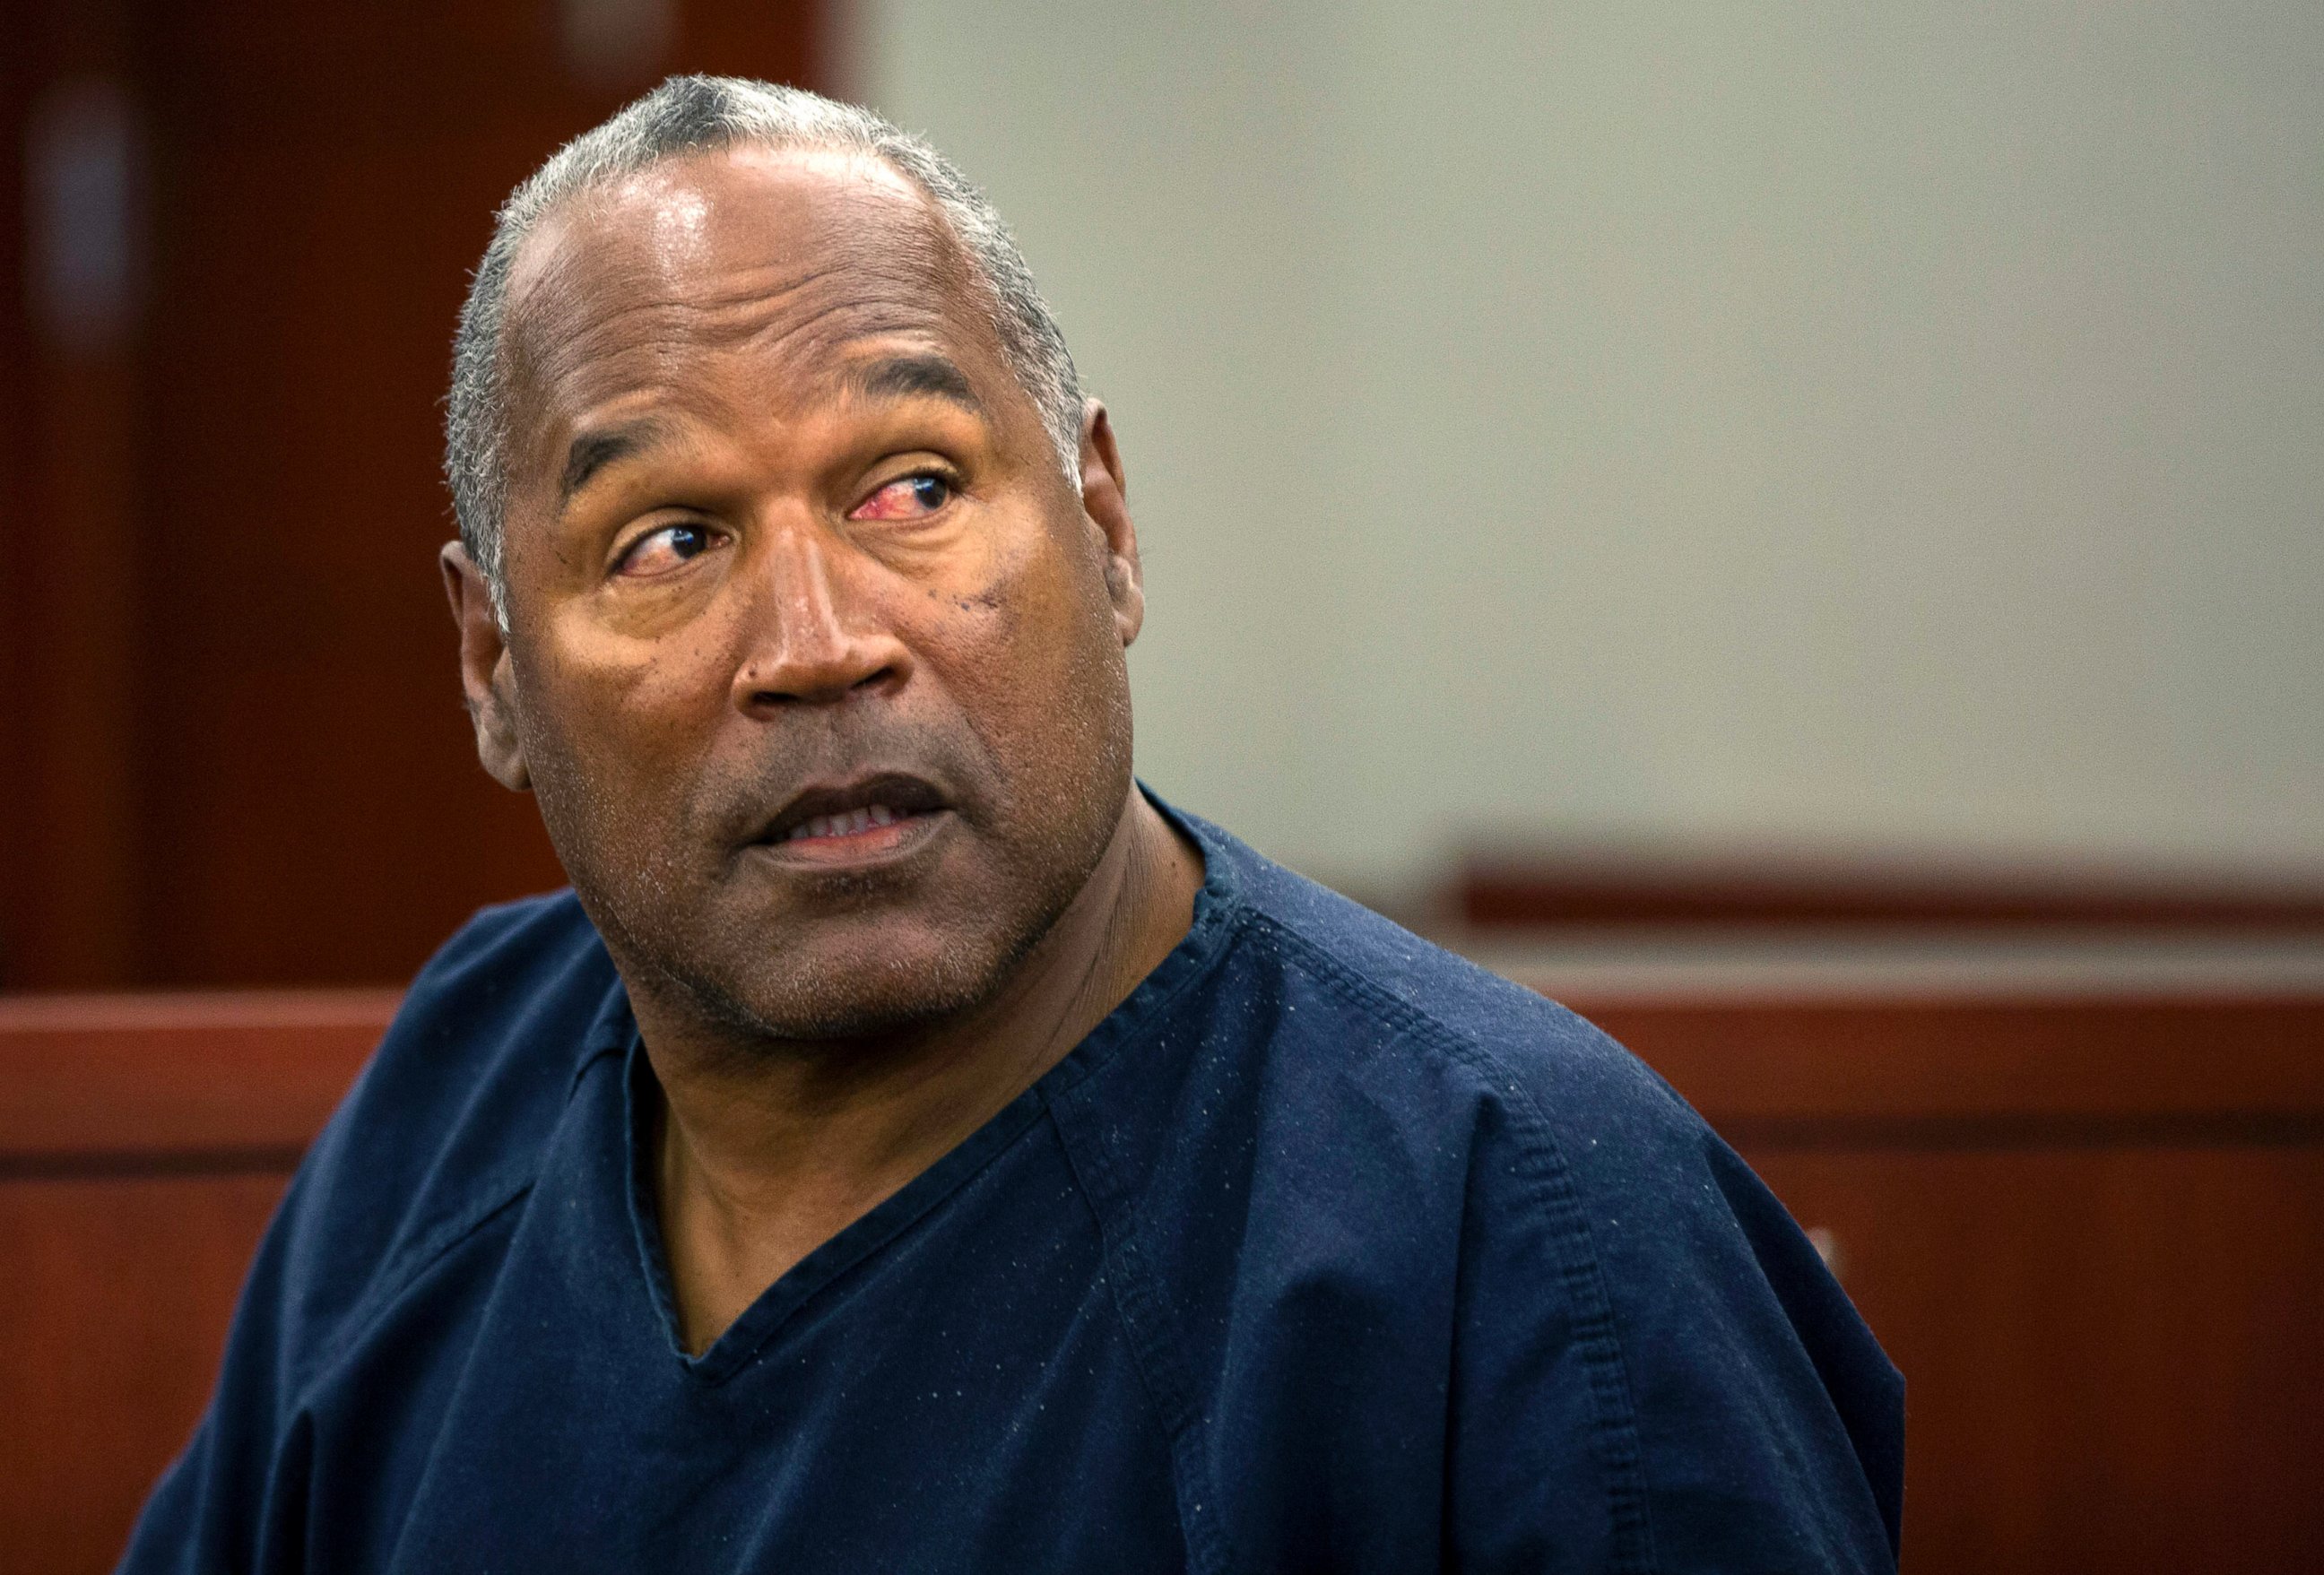 PHOTO: O.J. Simpson waits to continue testifying after a break in an evidentiary hearing in Clark County District Court May 15, 2013 in Las Vegas.